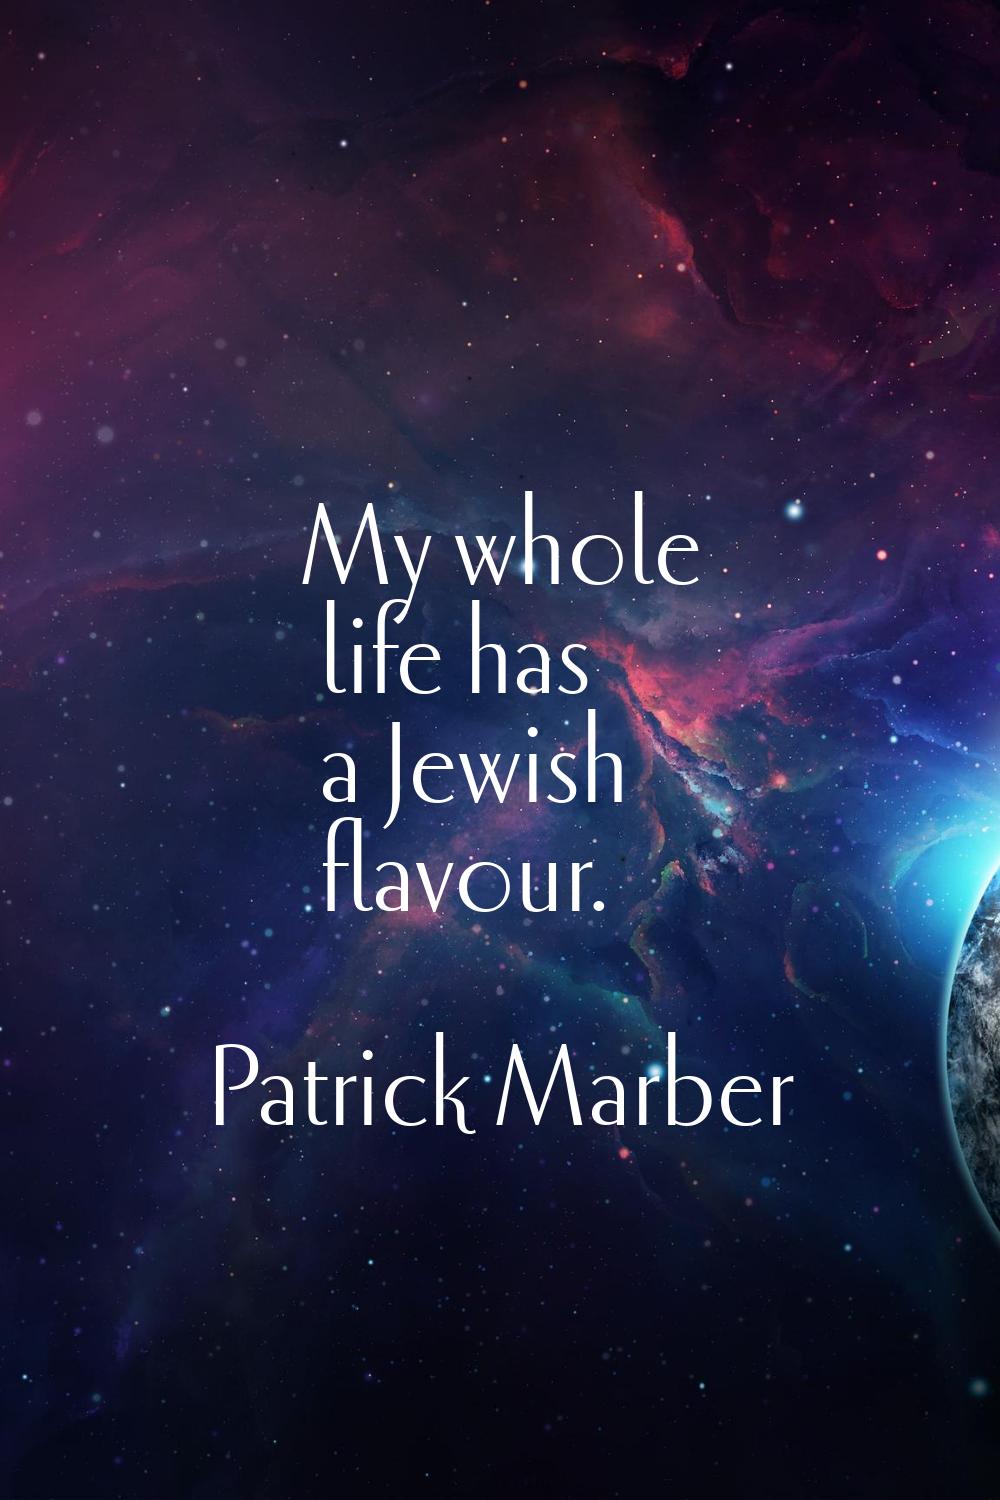 My whole life has a Jewish flavour.